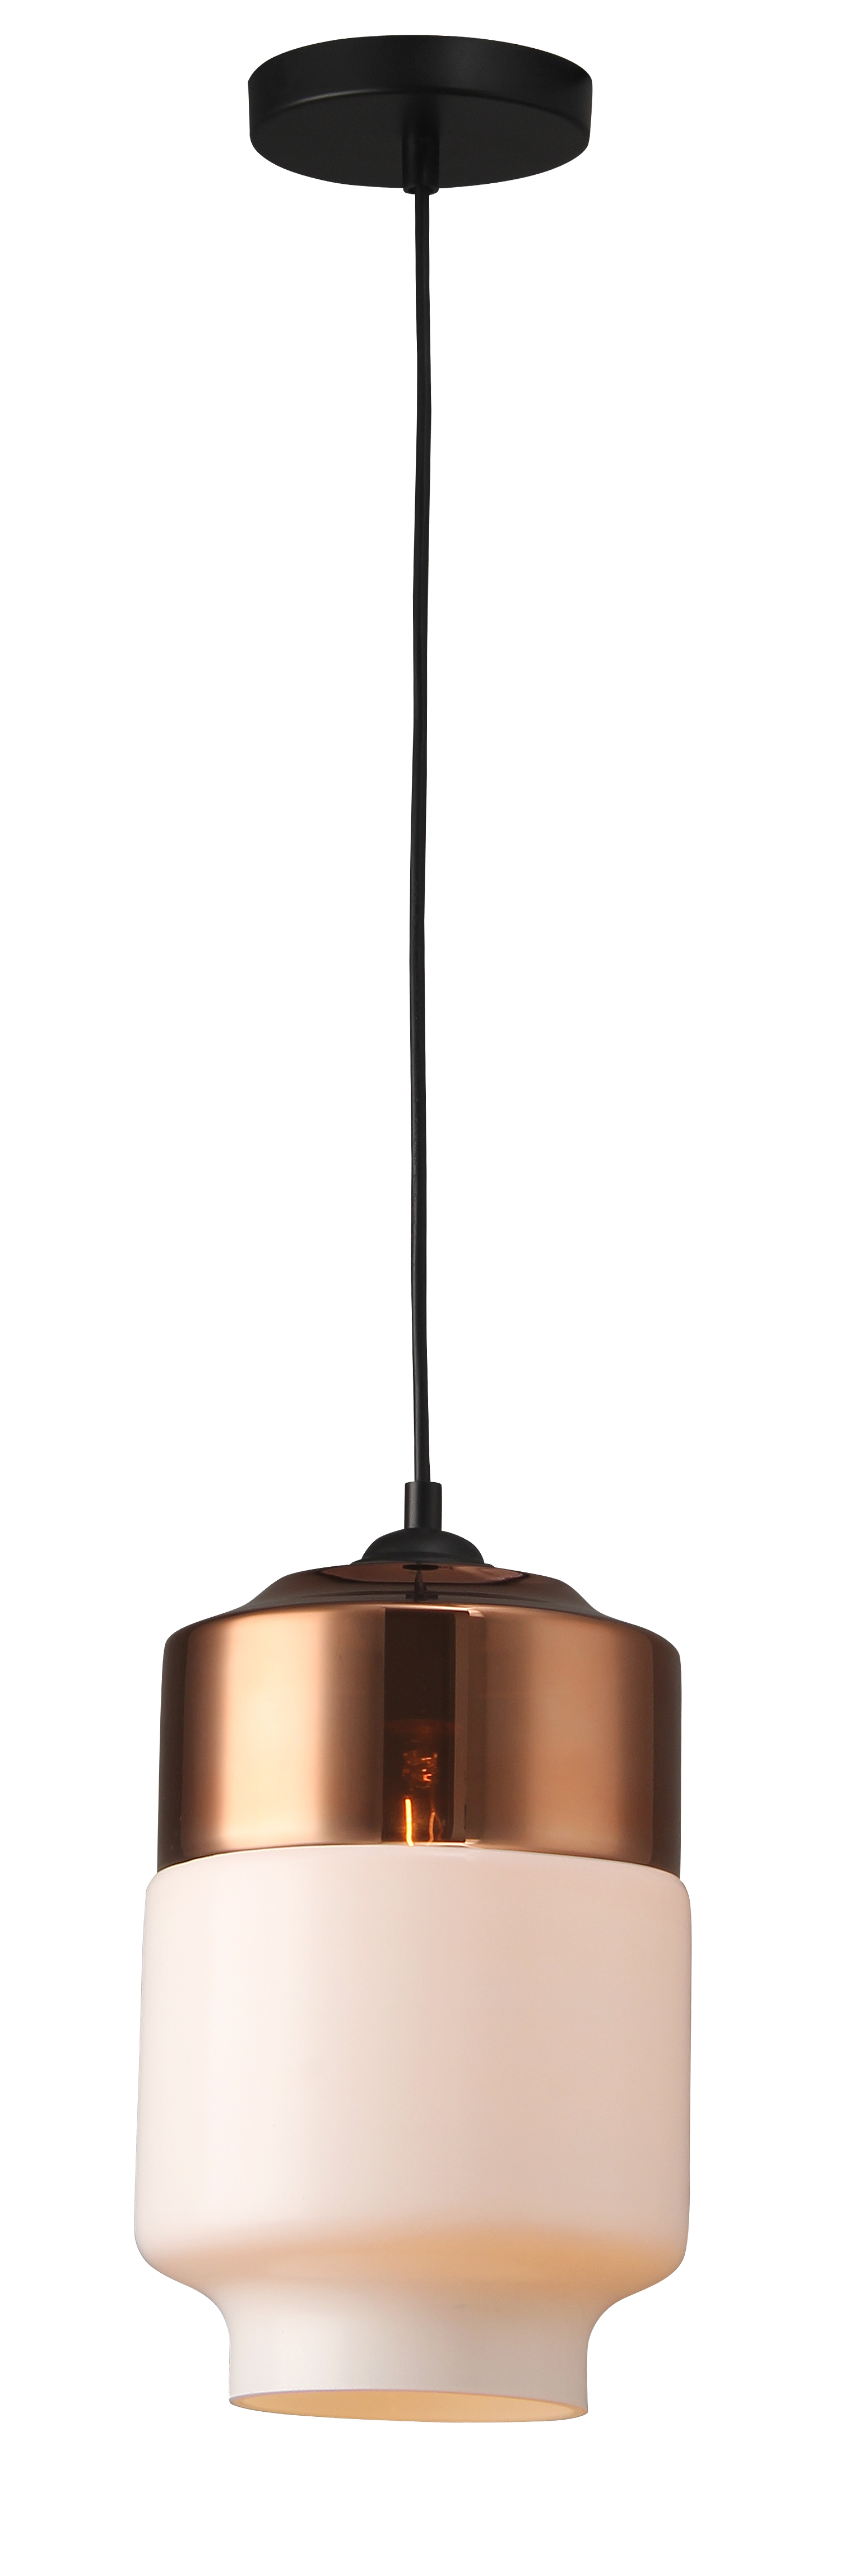 P1016CW E27 pendant light Copper and White Glass design Vintage Modern hanging lamp